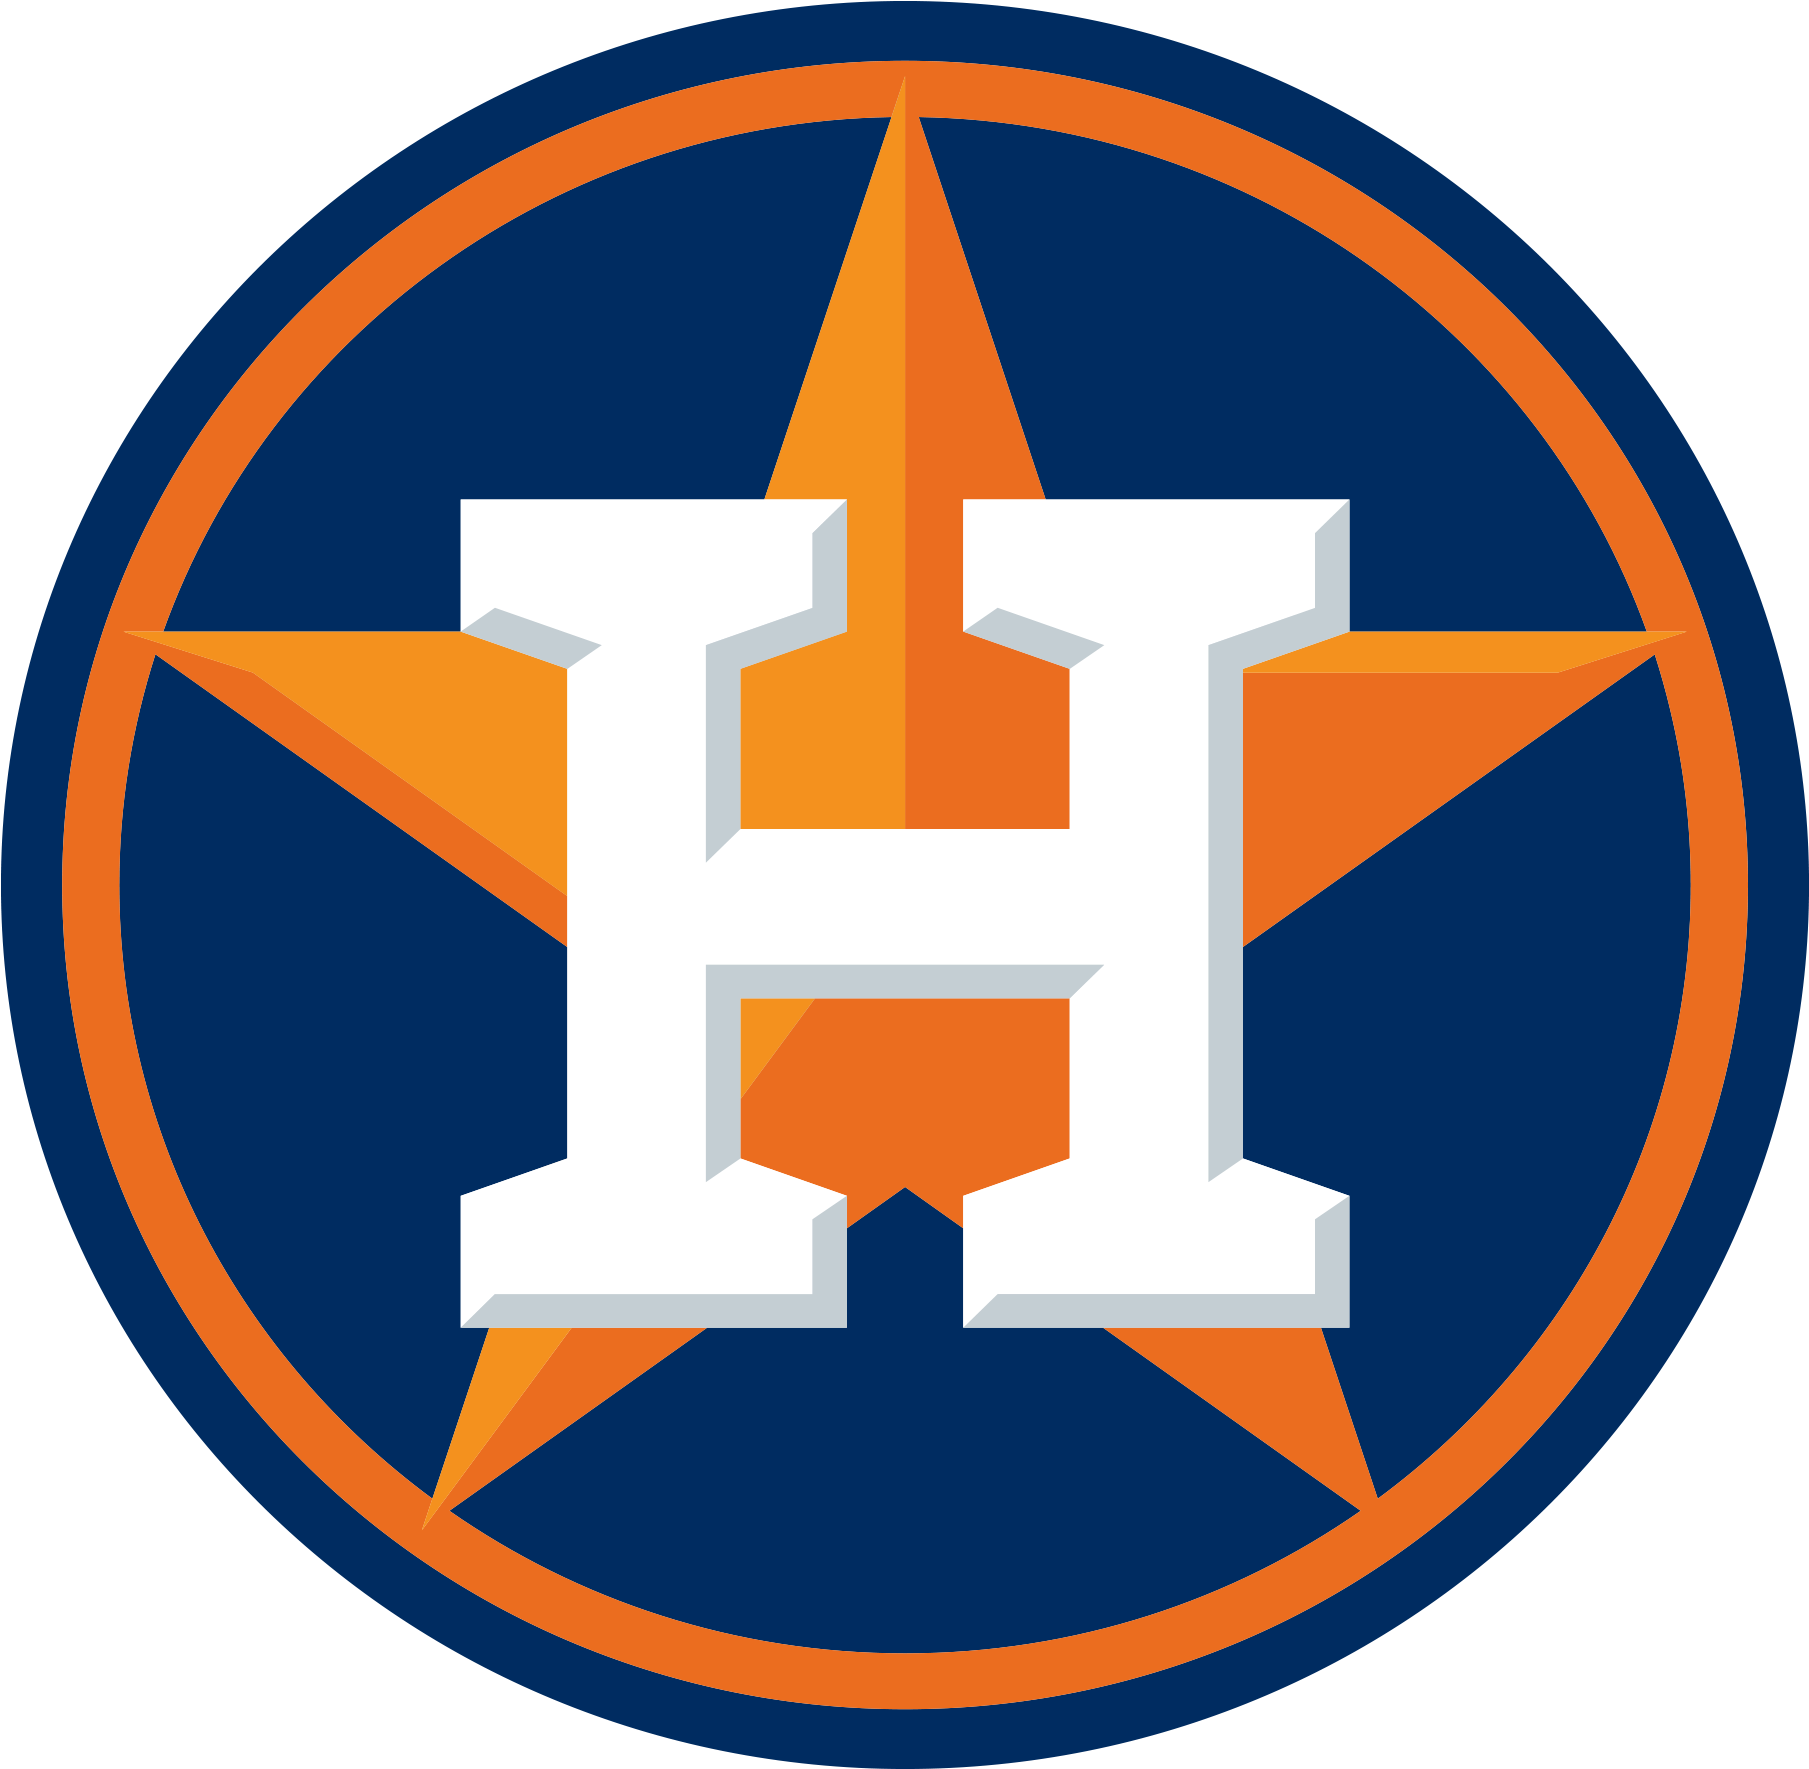 Houston Astros Free Download Png Png Image - Houston Astros Logo 2018 (2000x2000)